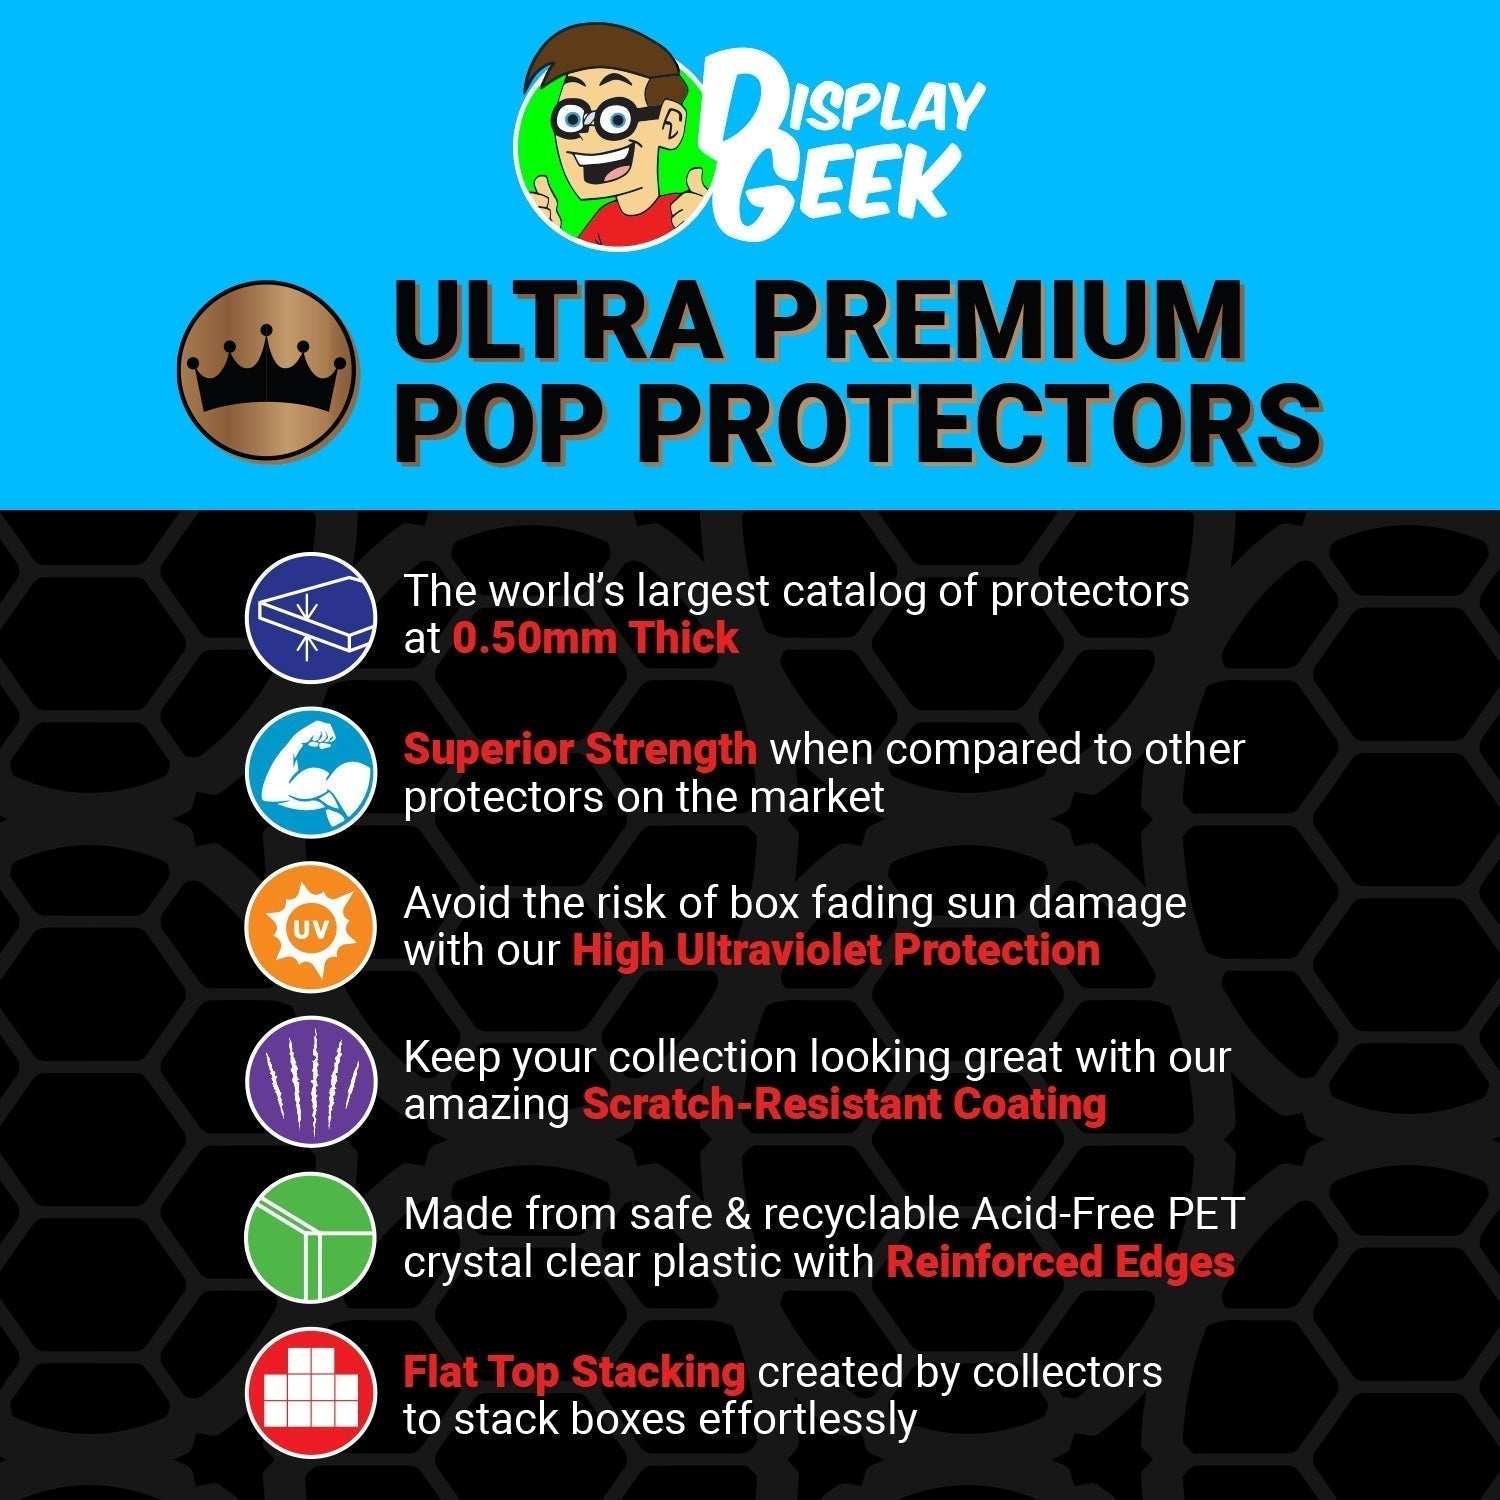 Pop Protector for Pop & Tee Marvin the Martian Metallic #1085 Funko Box - PPG Pop Protector Guide Search Created by Display Geek